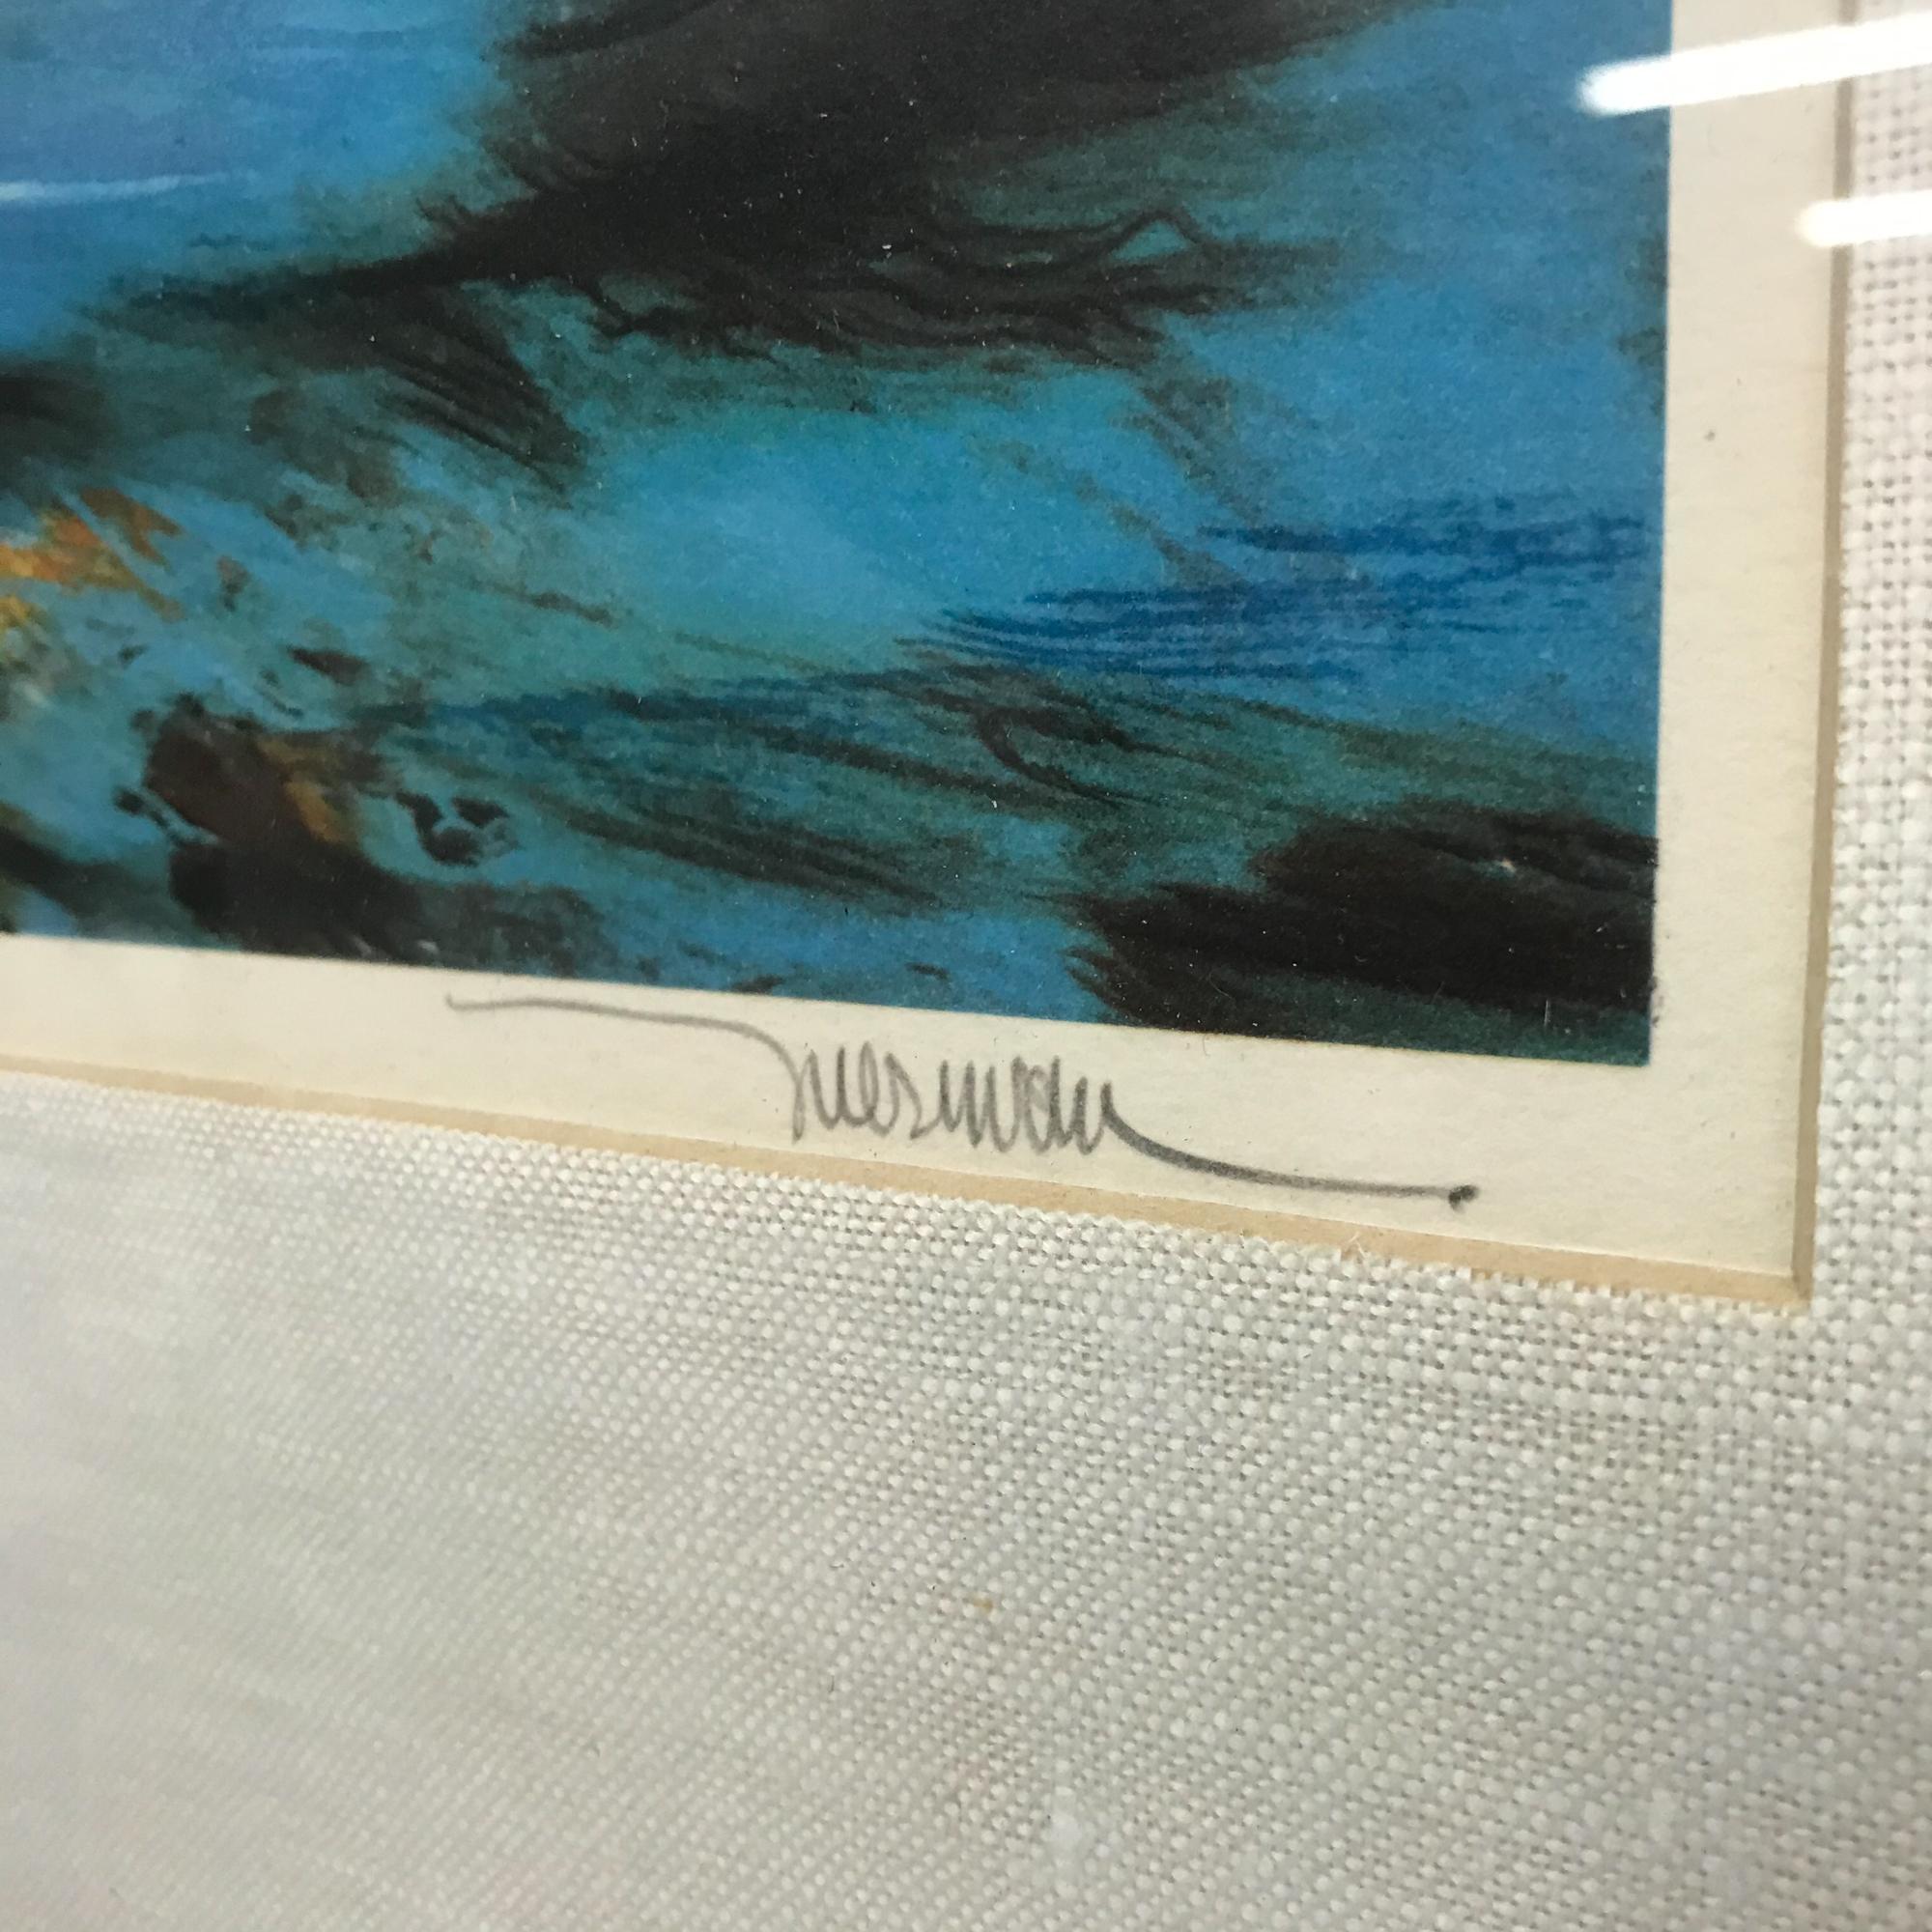 For your consideration, a vintage small lithography by Leonardo Nierman. Signed on pencil in the lower right. Inscription in the lower left “ 184/250”.

Beautiful abstract with dominant blue color. Original frame with gold trim.
Made in Mexico